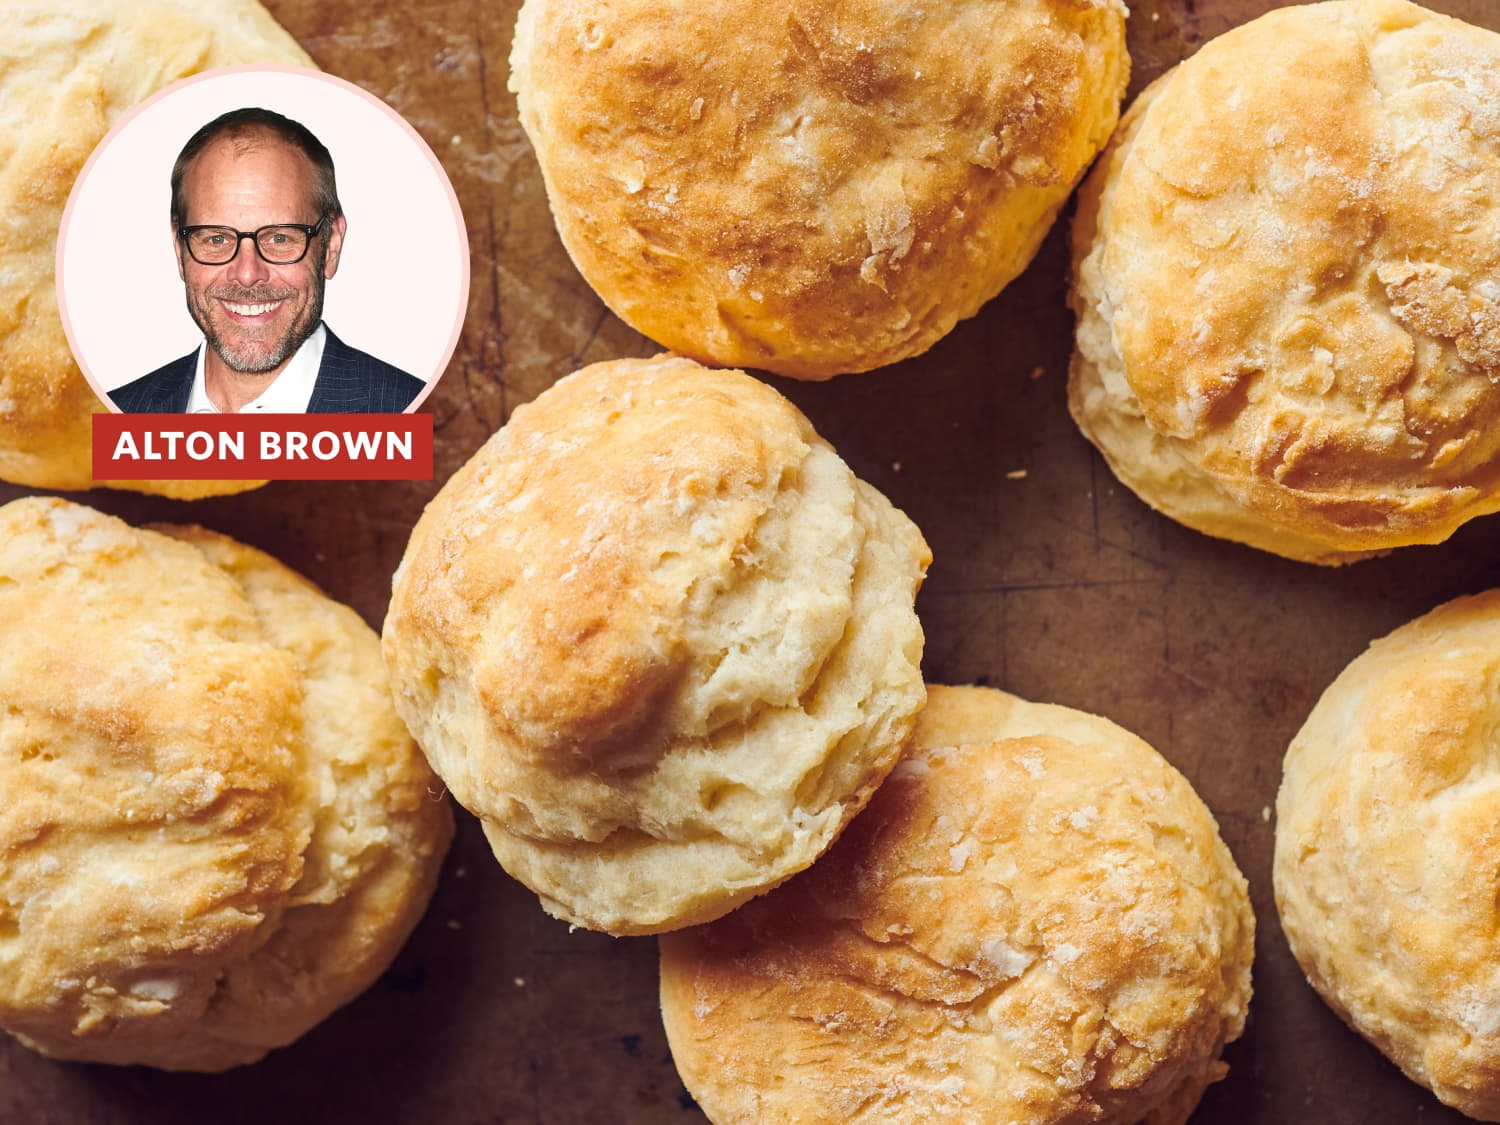 I Tried Alton Brown S Southern Biscuit Recipe Kitchn